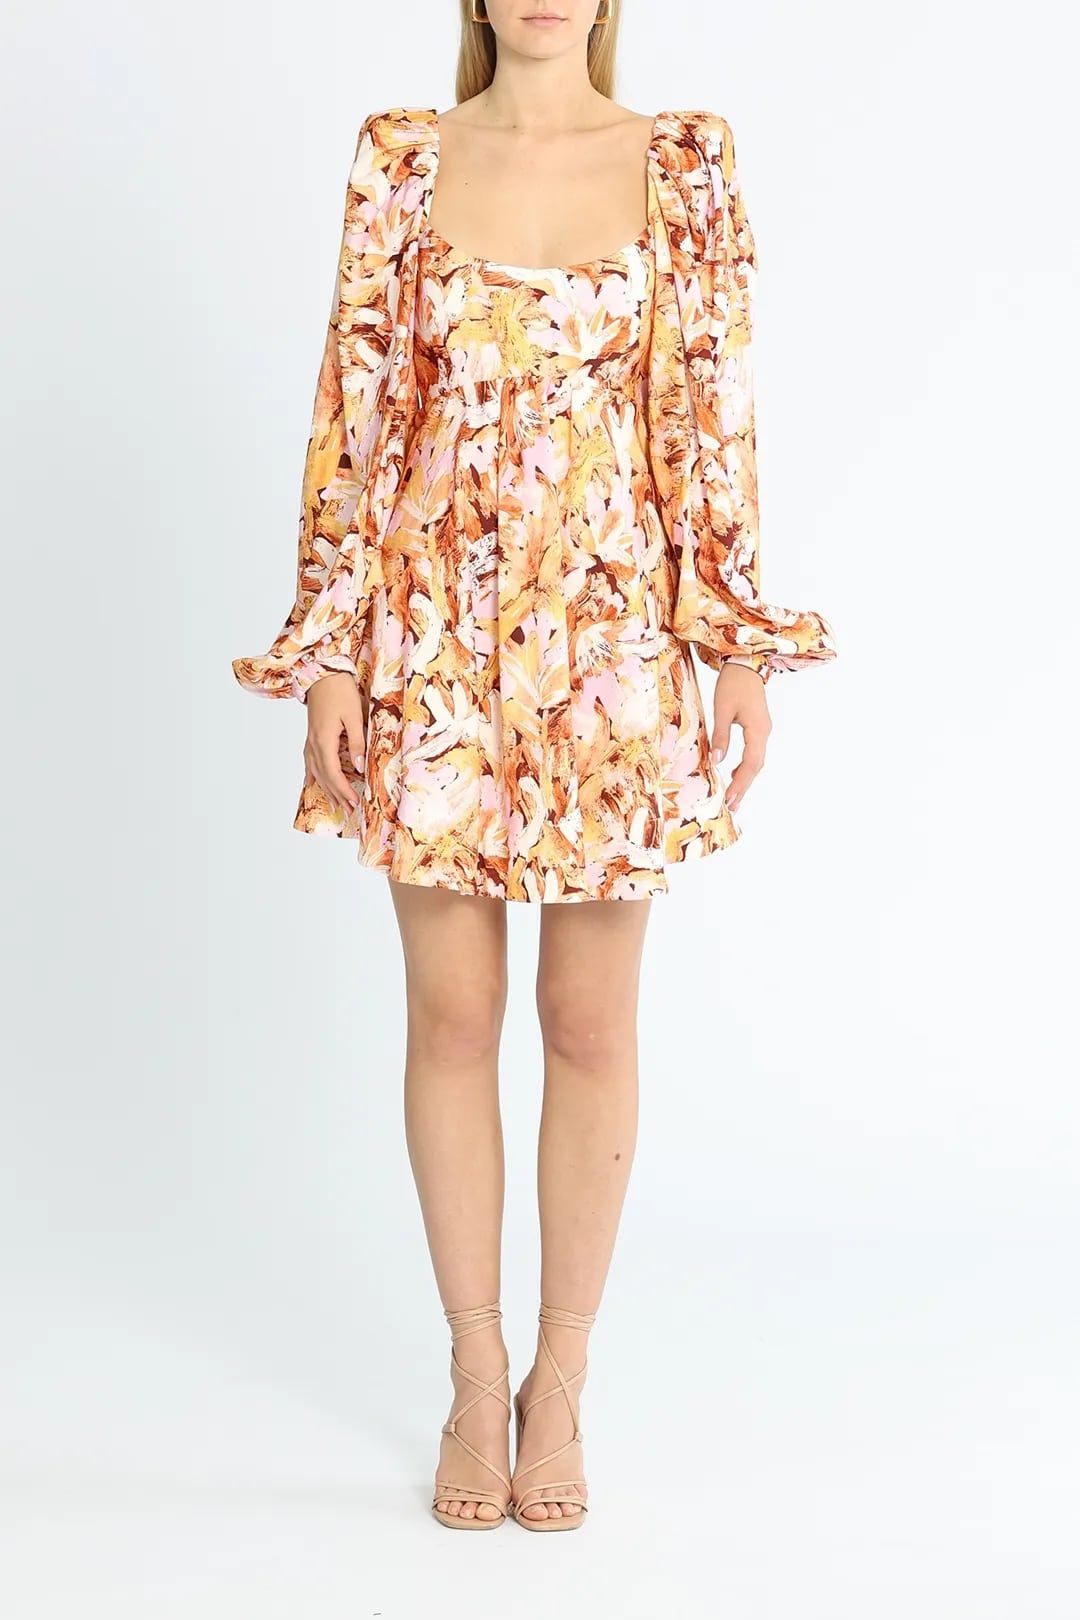 Hire Oliver Mini Dress for cocktail parties.